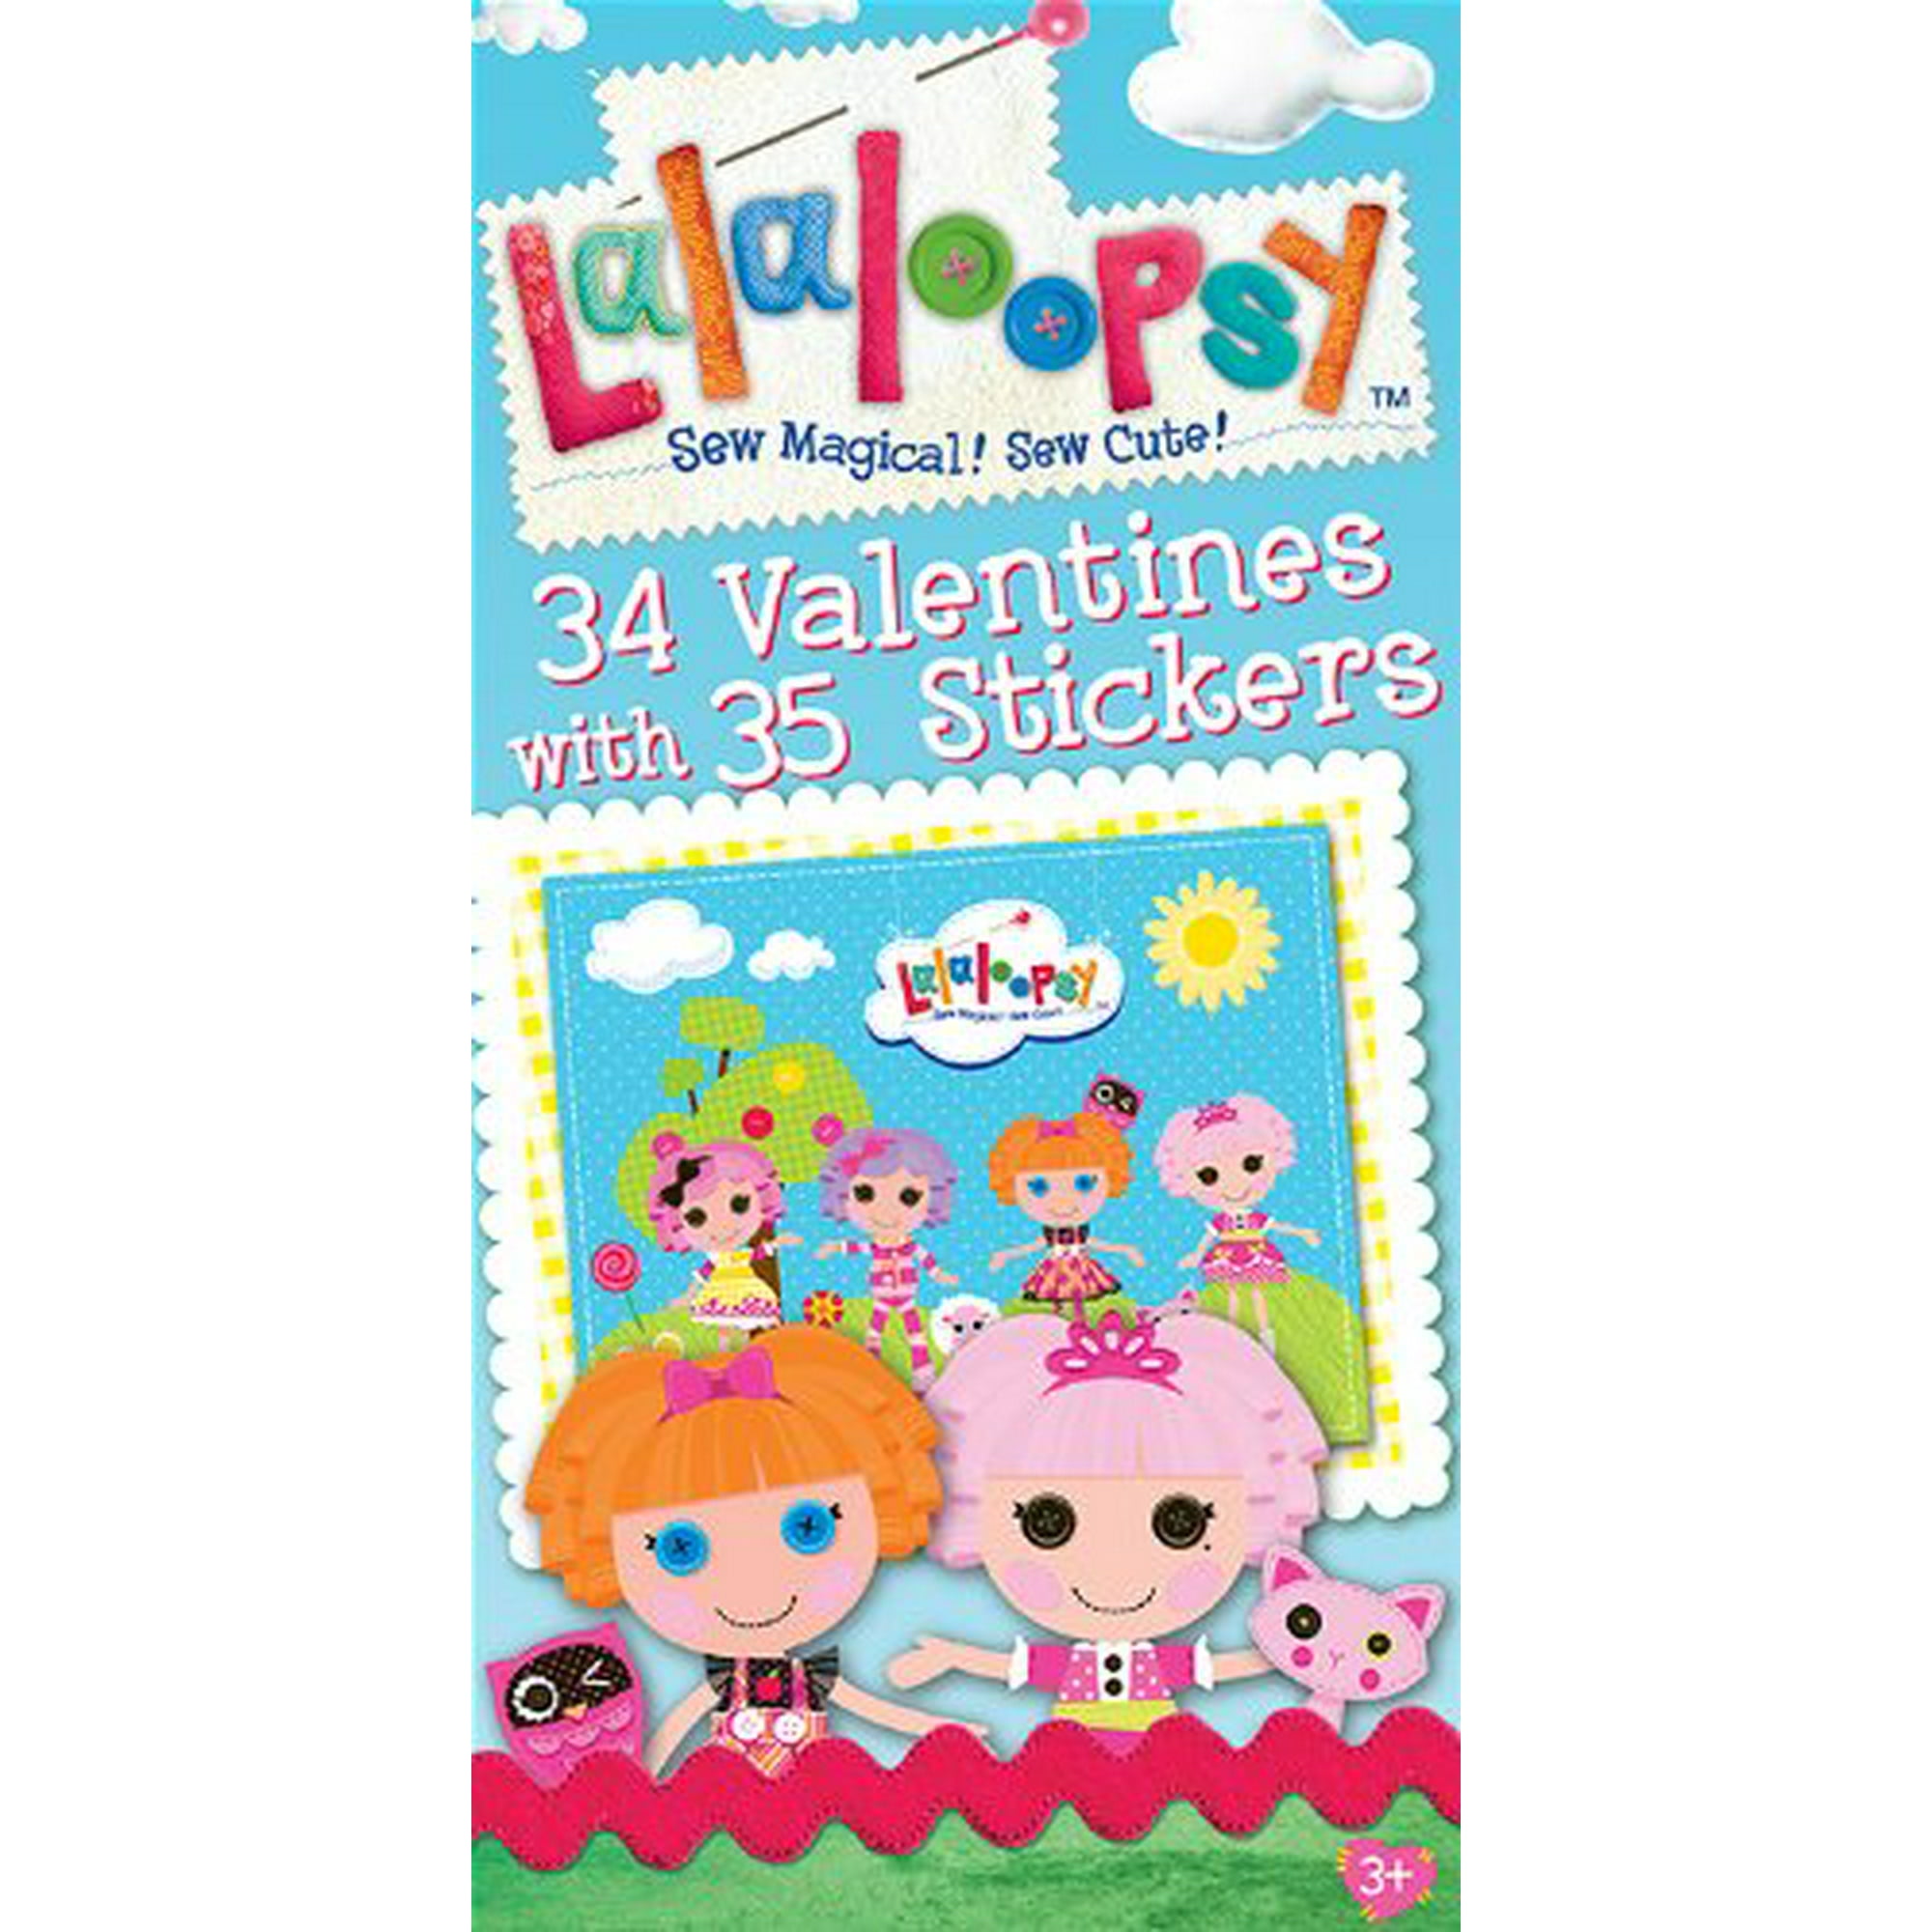 Lalaloopsy 34 Valentines Cards with Stickers | Walmart Canada